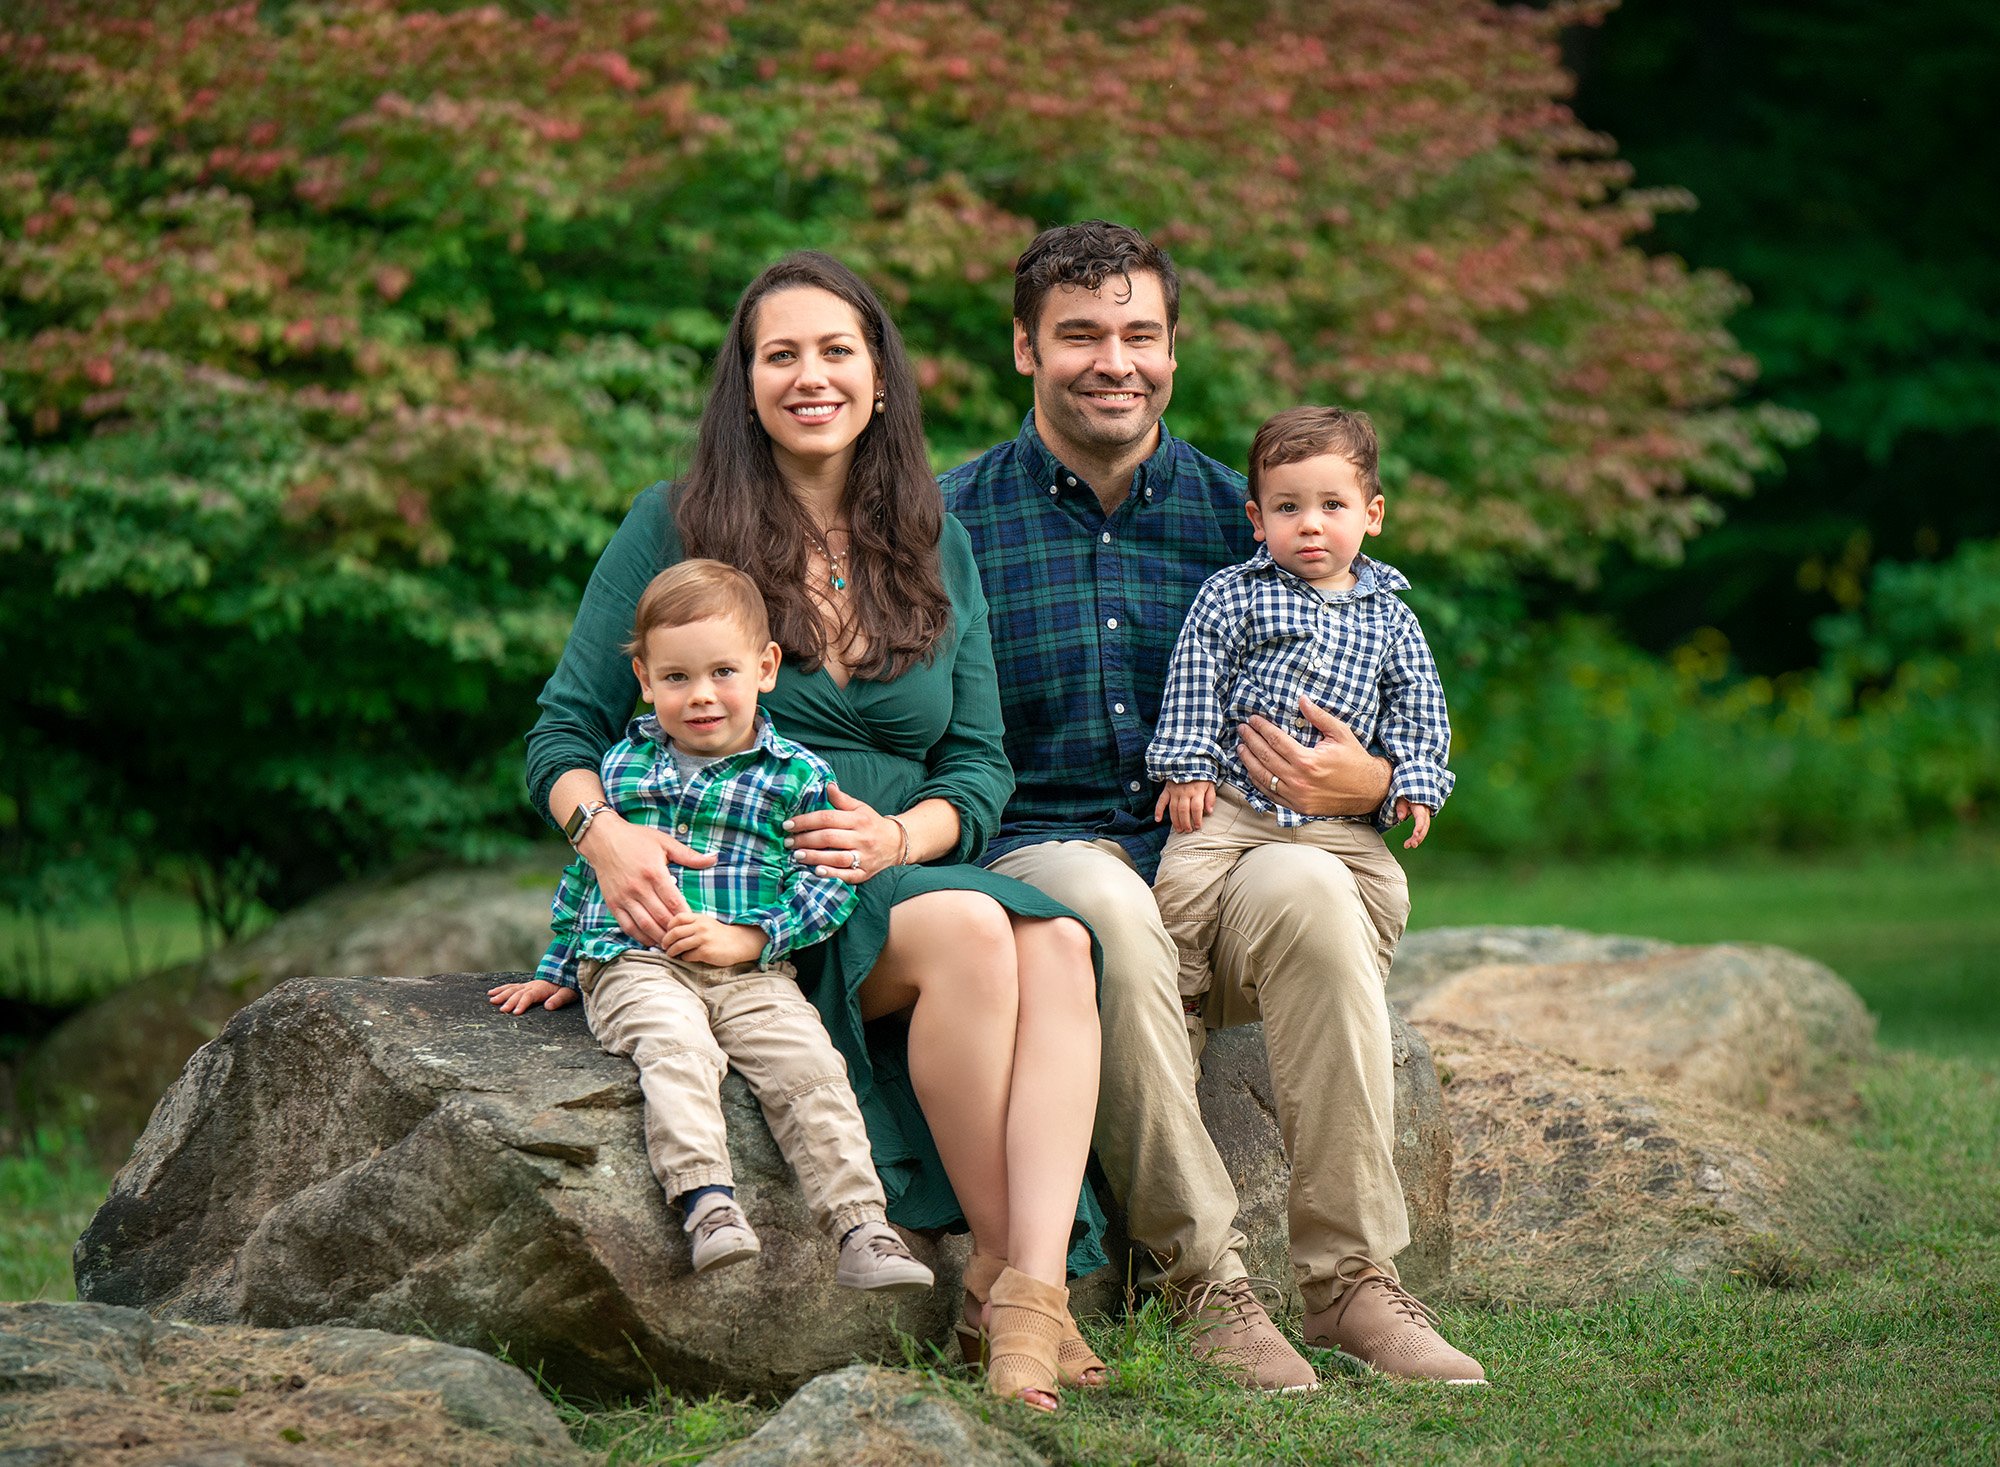 1 year old and family photography couple posing with young sons while sitting on a rock in nature